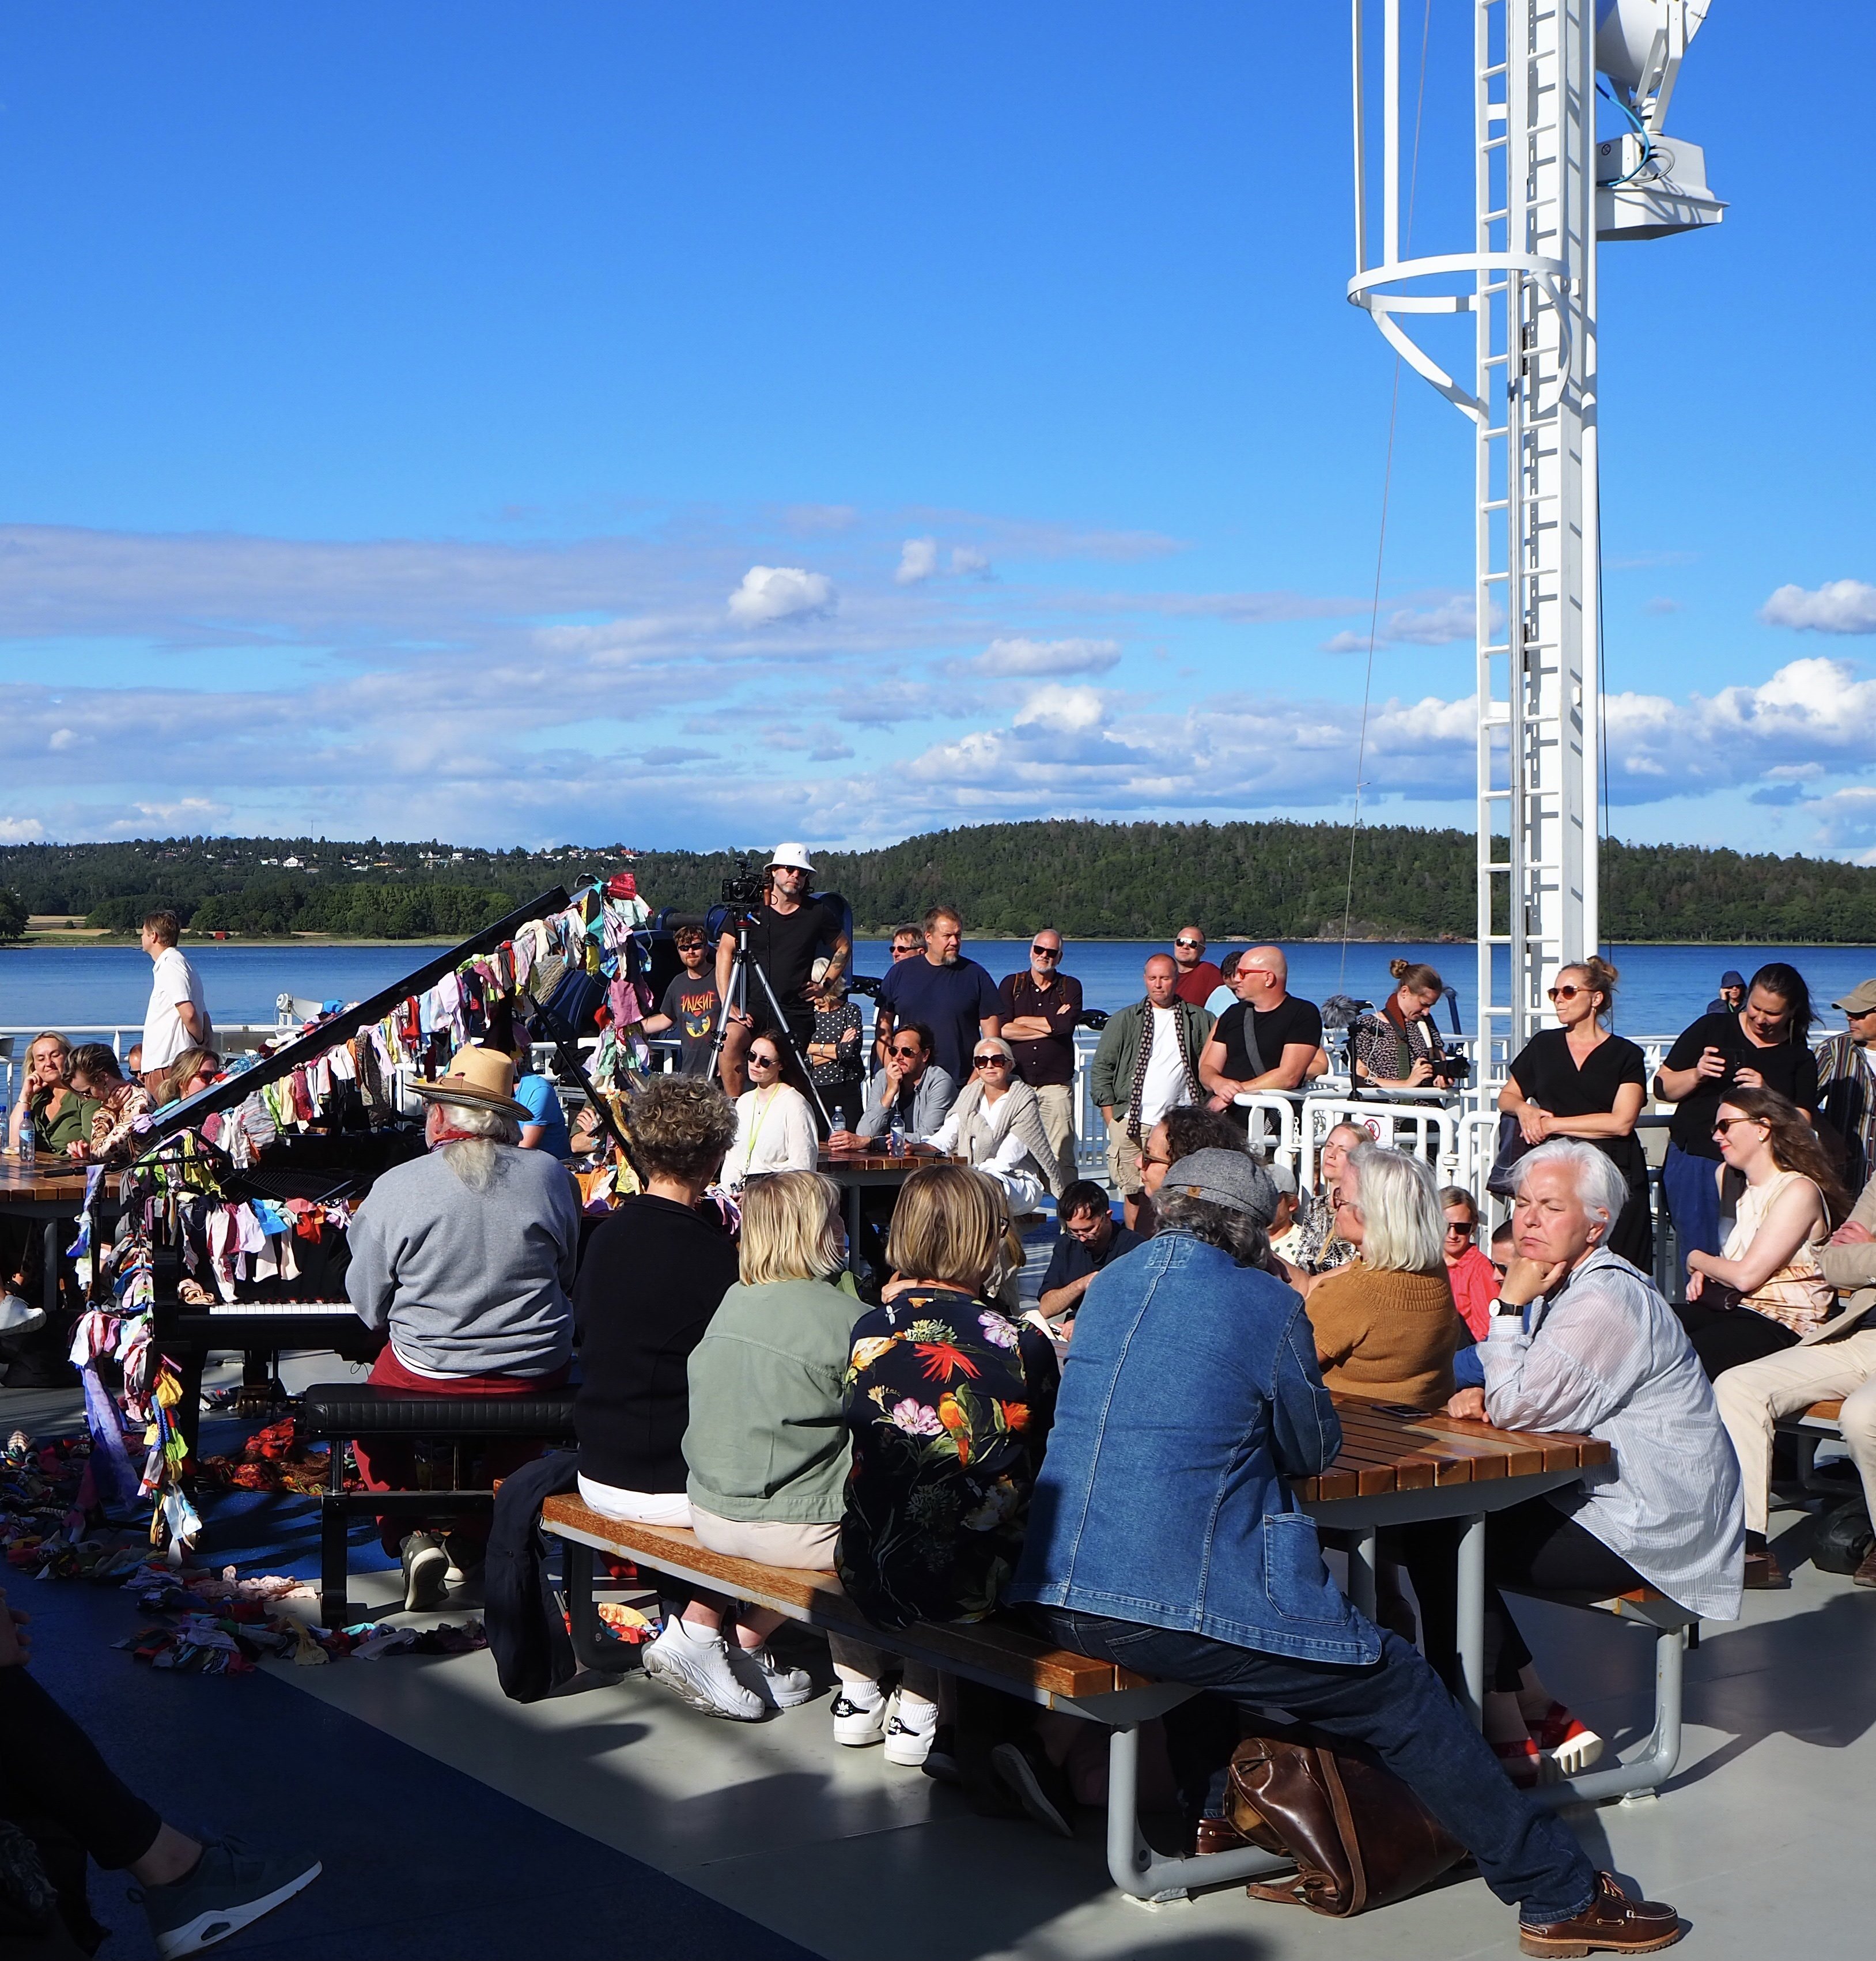 Pianist Charlemagne Palestine plays aboard the Basto Electric, the world’s largest all-electric ferry, on its sailing from Moss, Norway, to Jeloya, main venue of the Momentum arts festival, in August 2021.Photo: Mark Footer